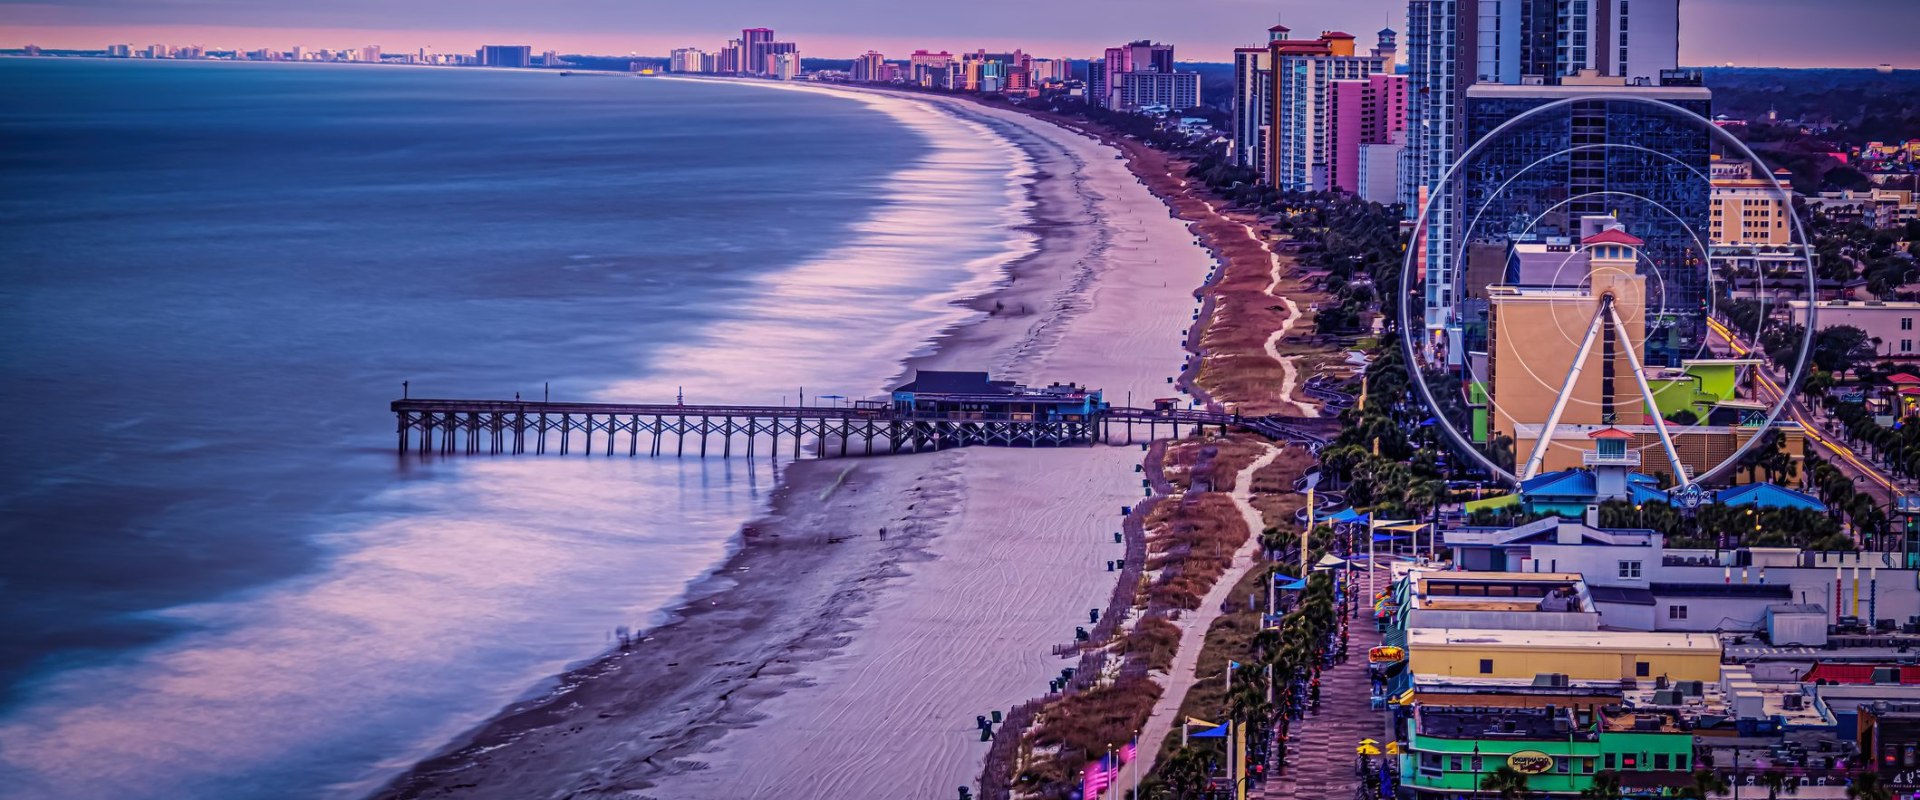 What to Expect from the Weather in Myrtle Beach During Winter